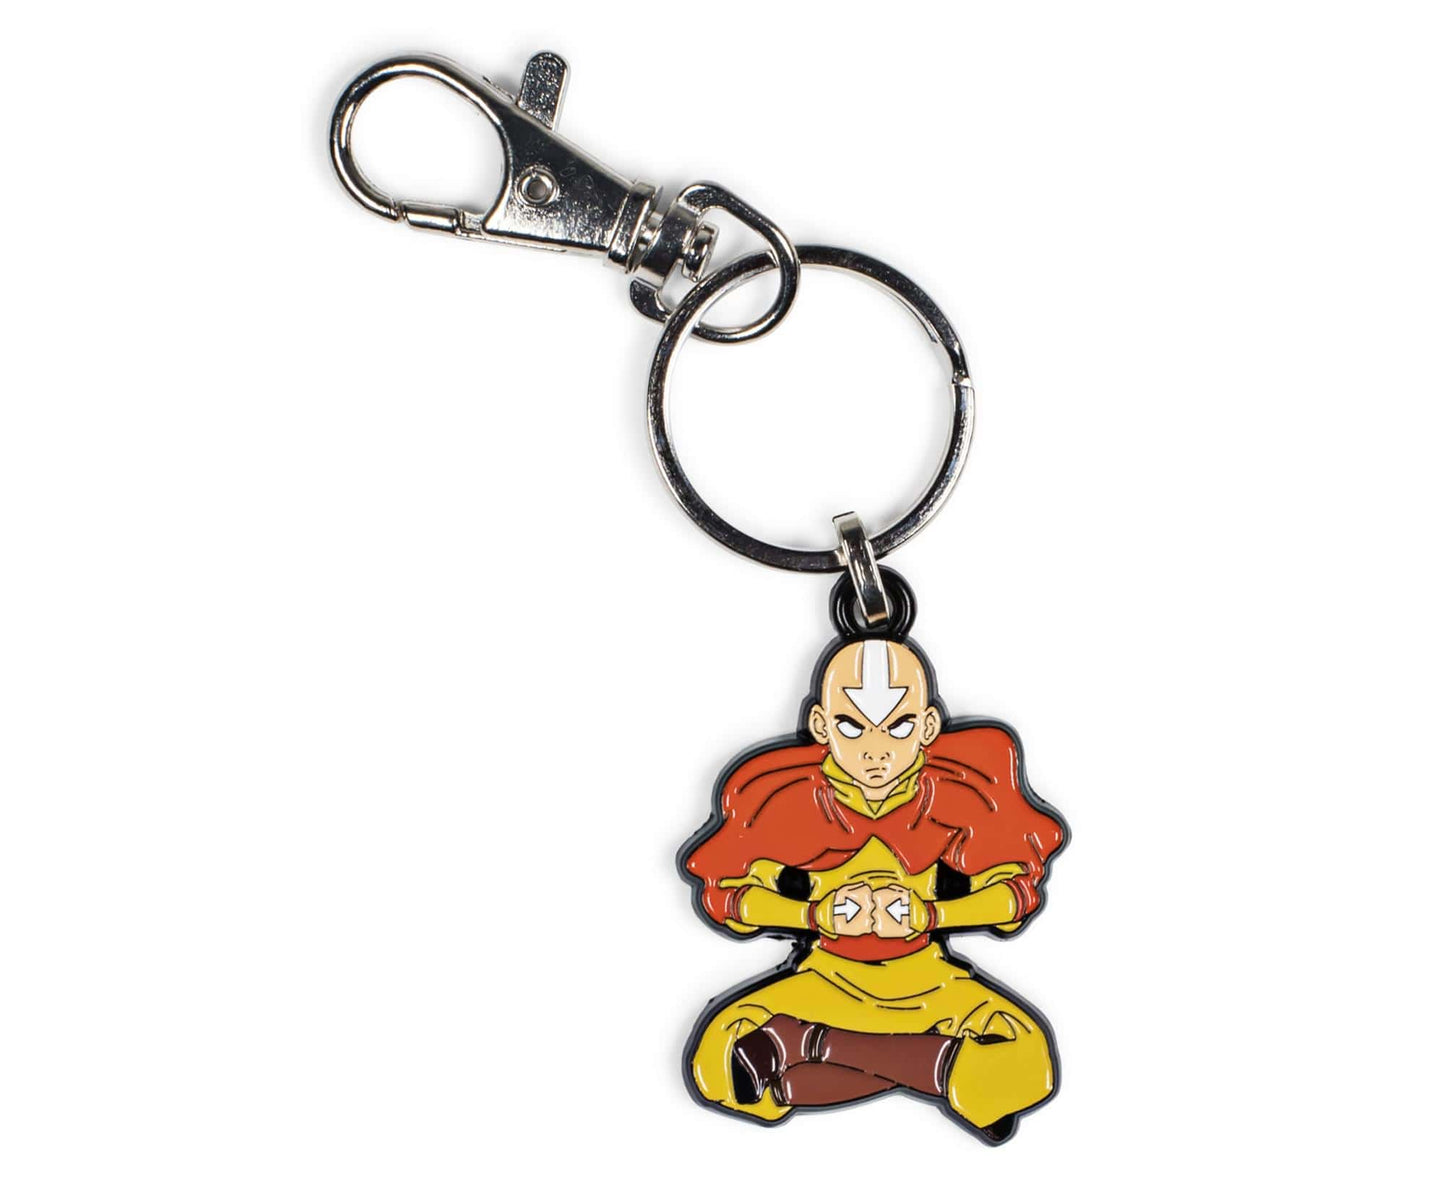 Aang in Avatar State Metal Keychain